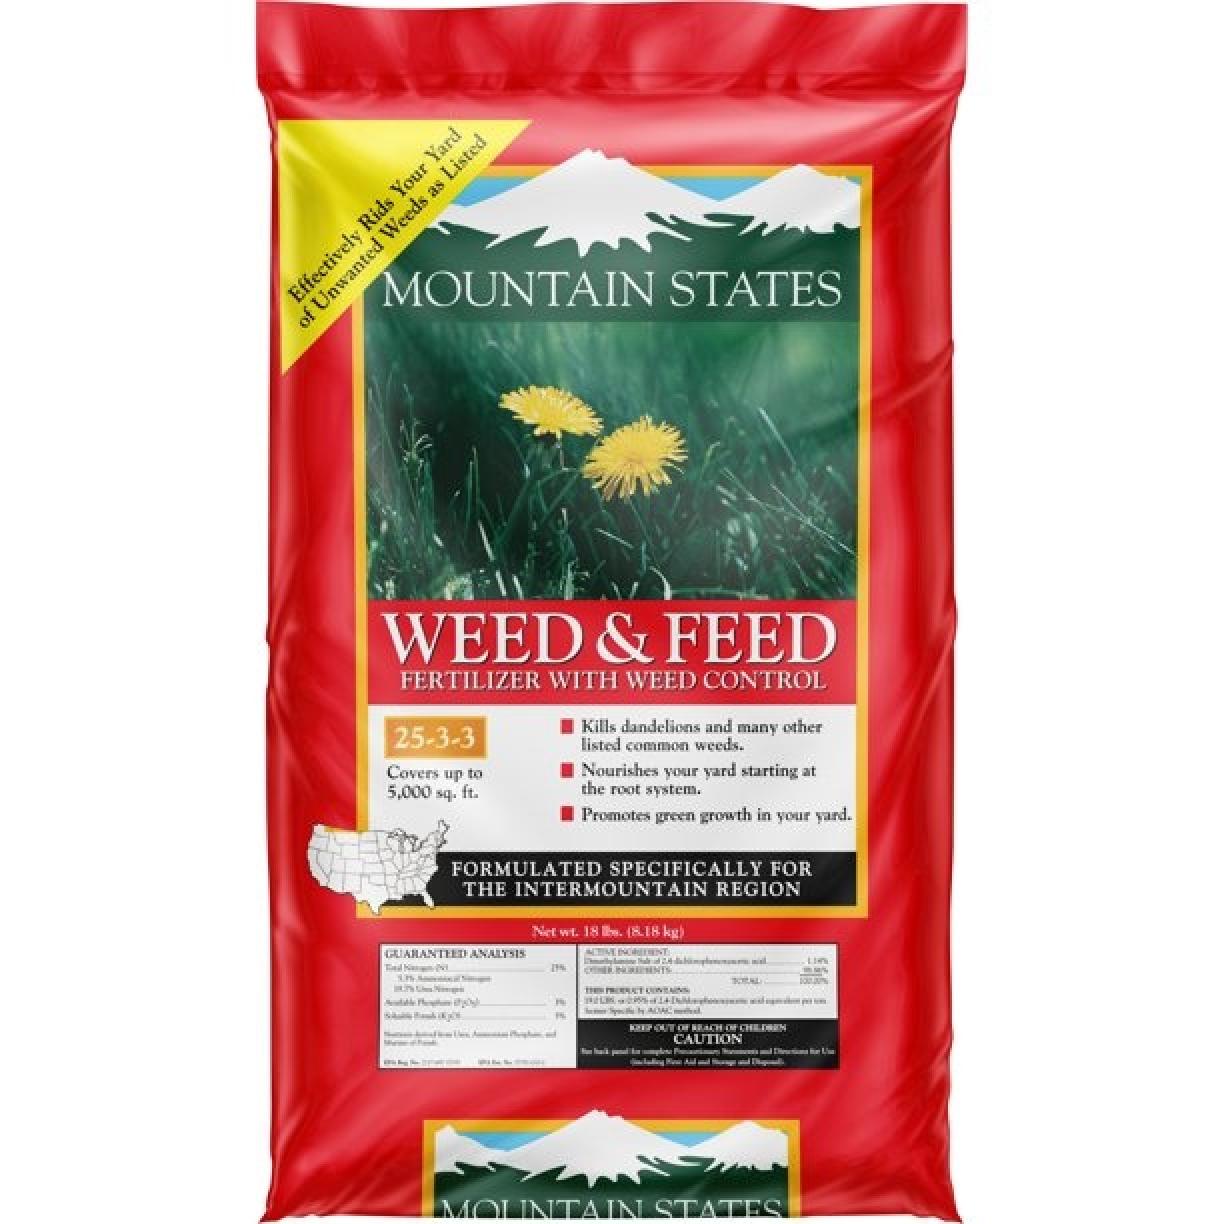 Mountain States Weed & Feed